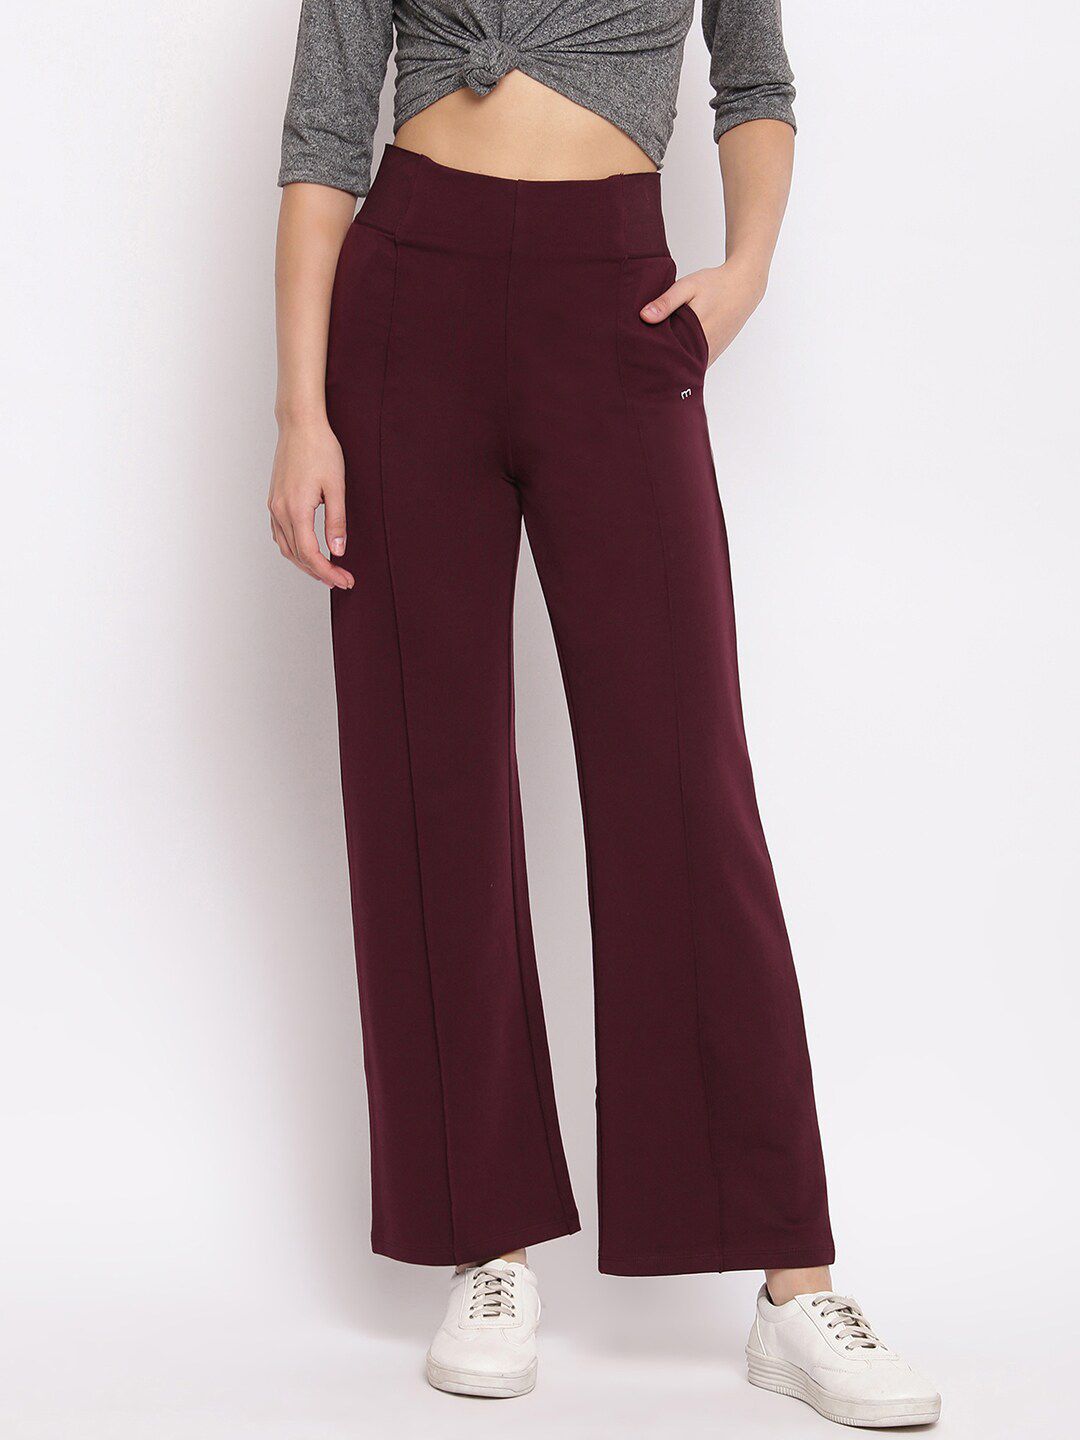 Marvel Women Maroon Solid Track Pants Price in India